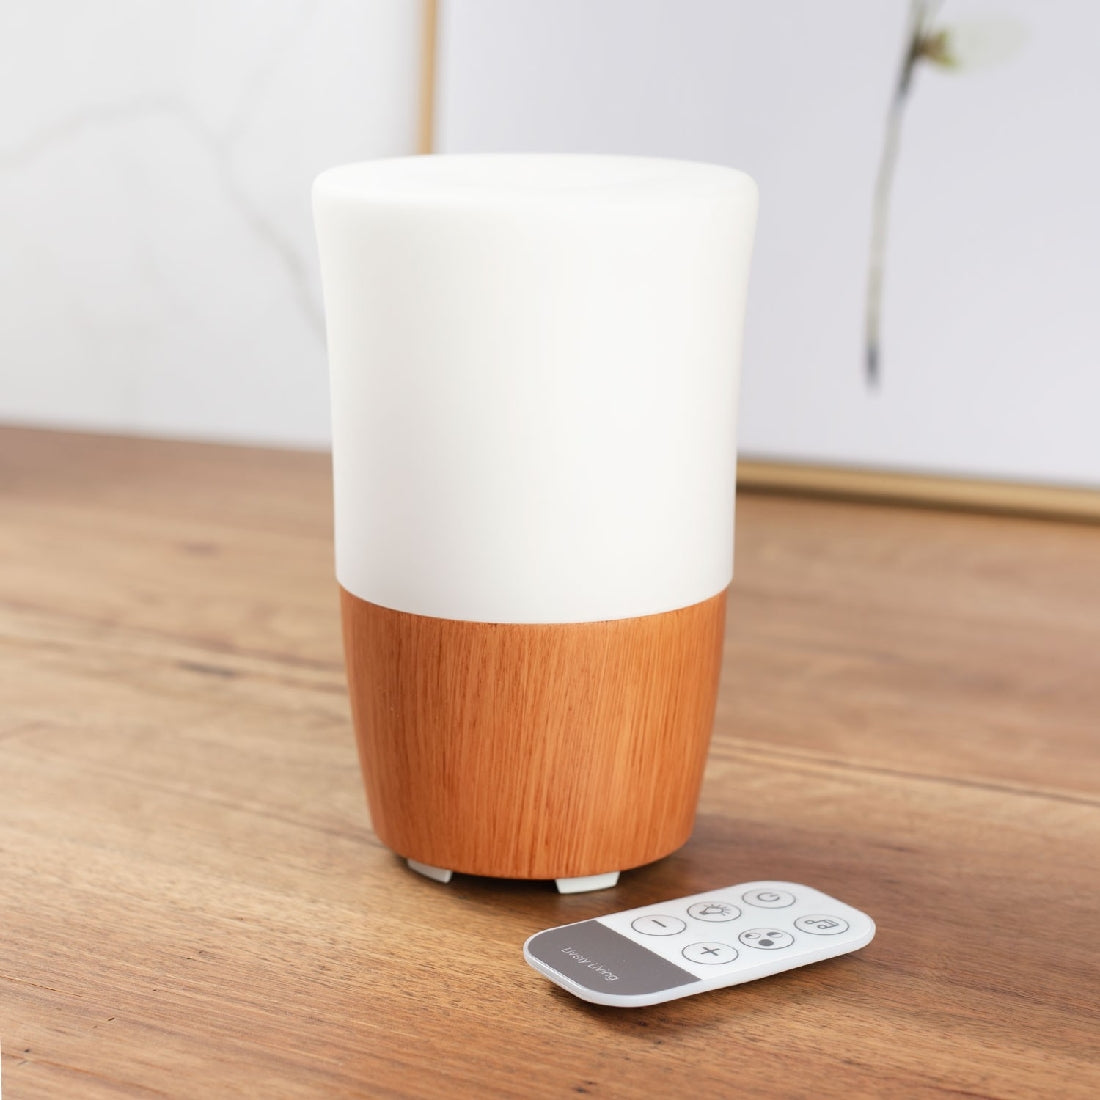 Lively Living - Aroma Sound Diffuser With Sound Tracks & Remote